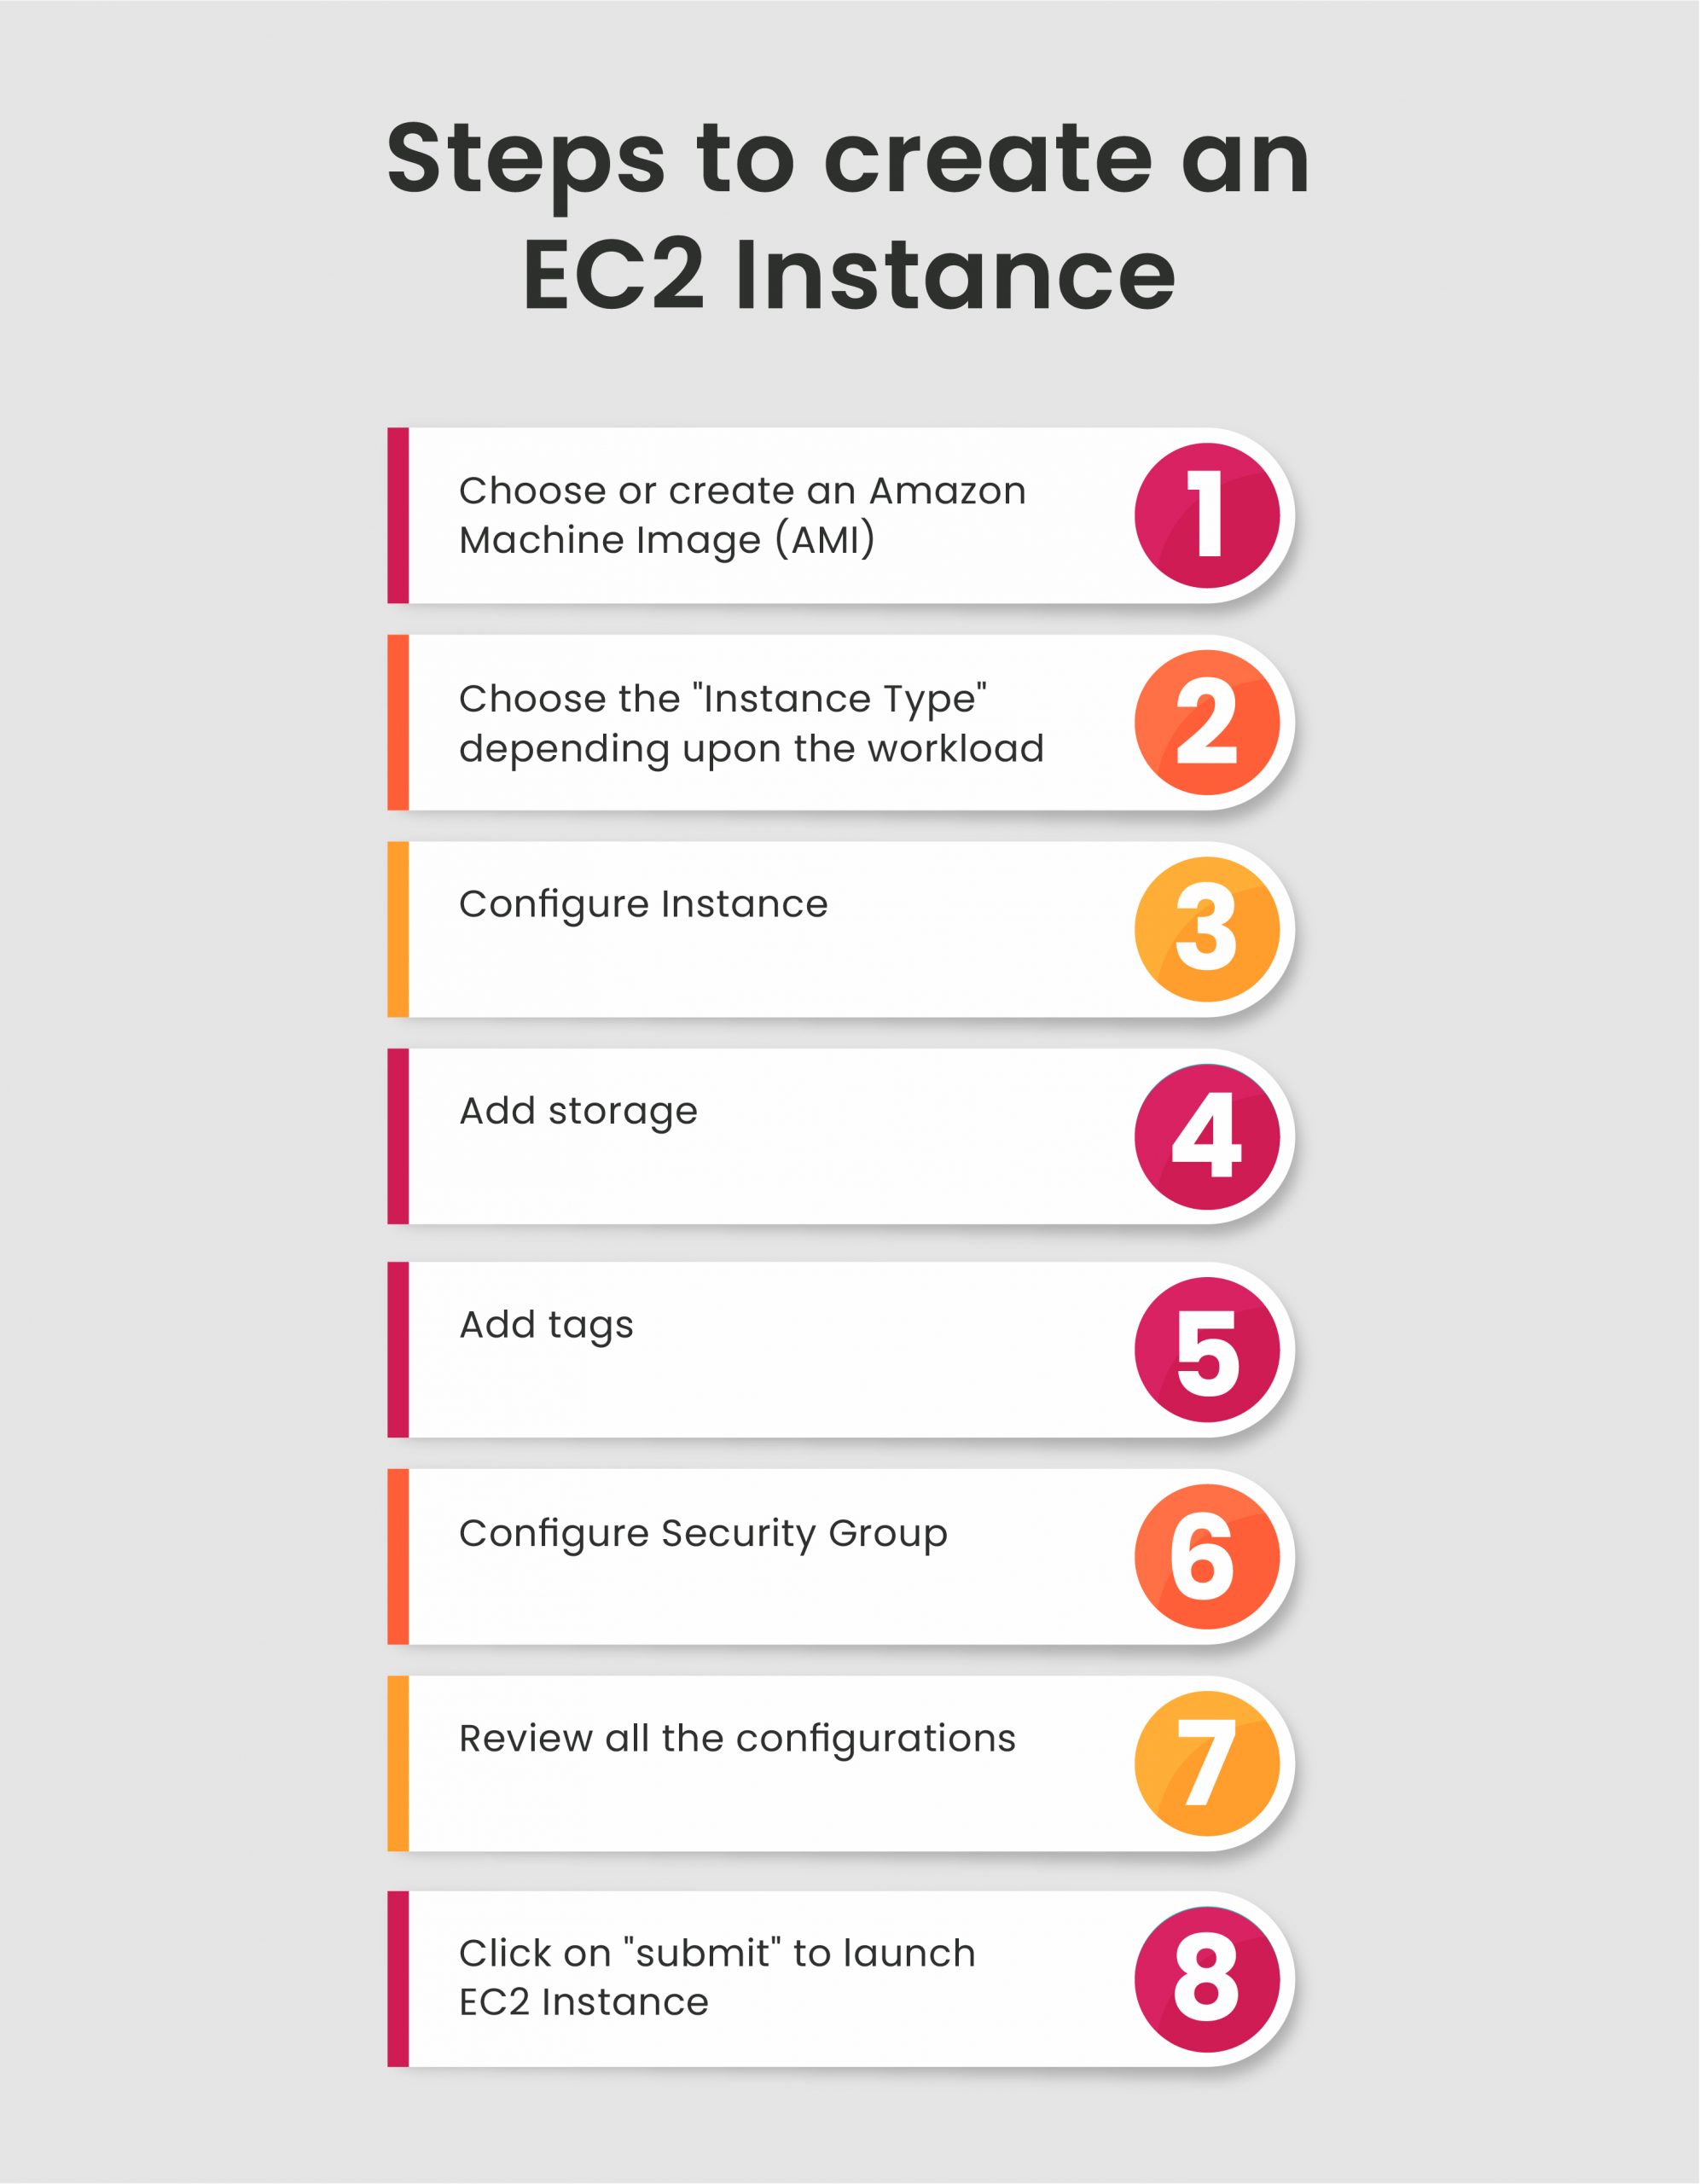 How does EC2 work